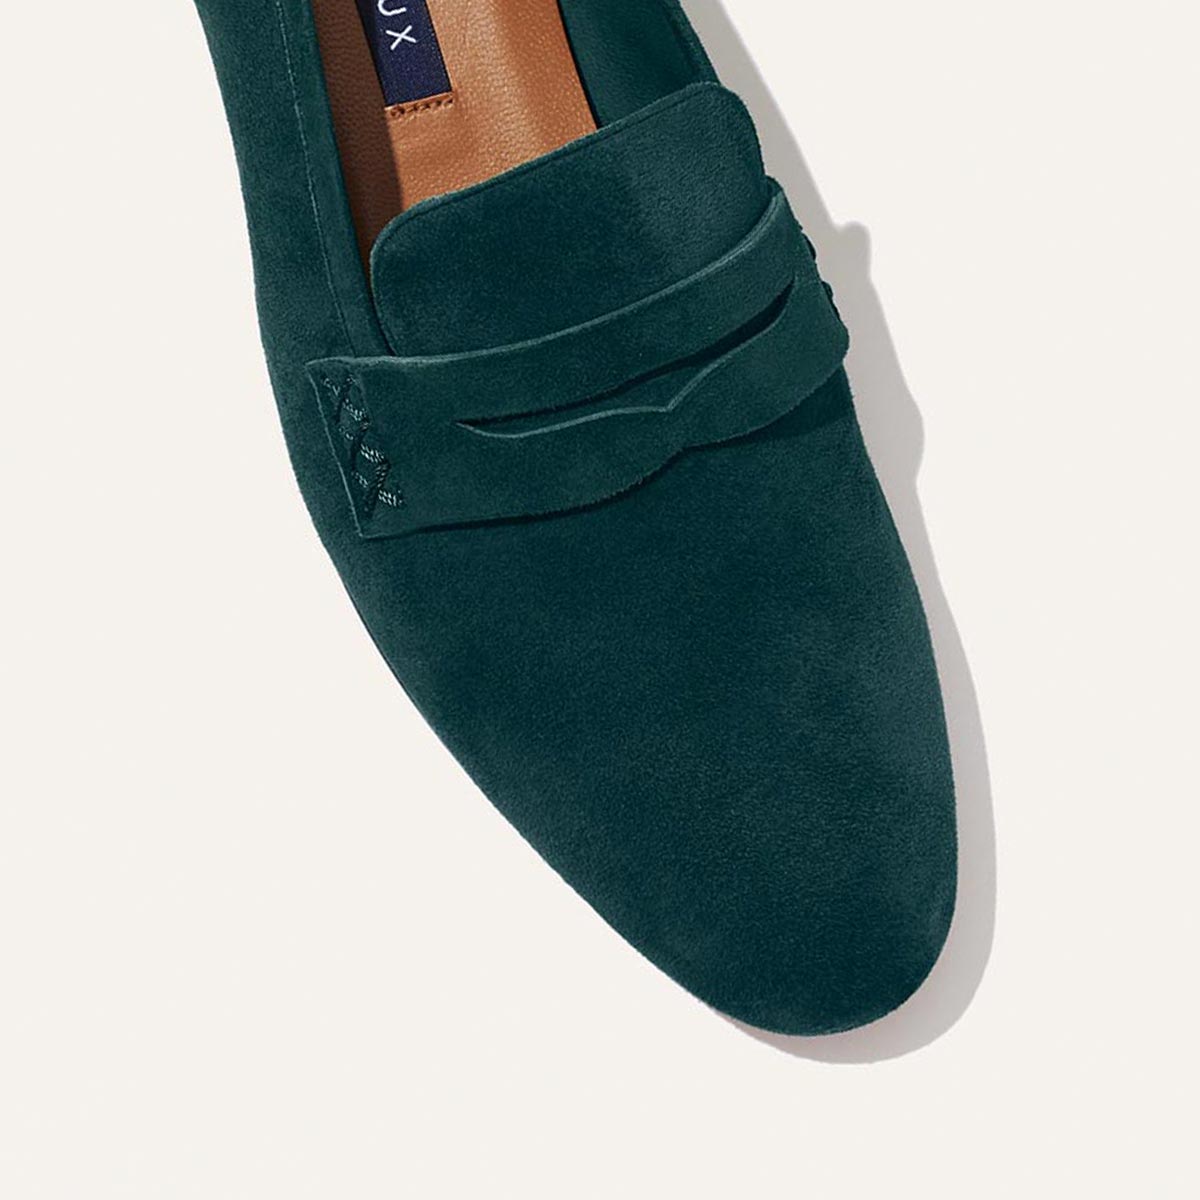 The Penny - Emerald Suede